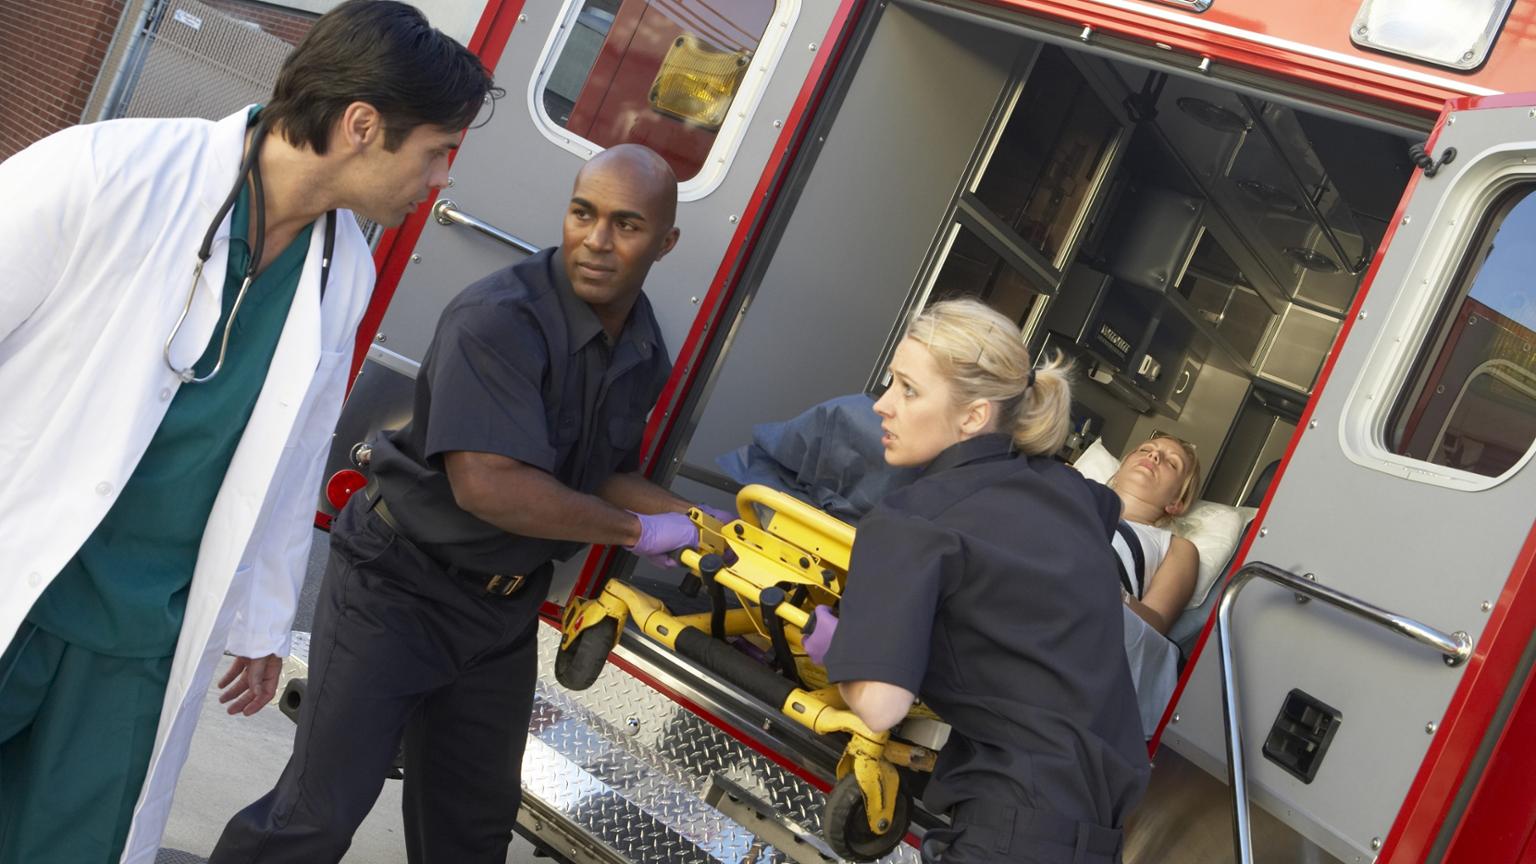 four people in the photo, one is in a doctor's coat, two are in EMT uniforms, and one person is laying on a gurney being taken out of an ambulance. 